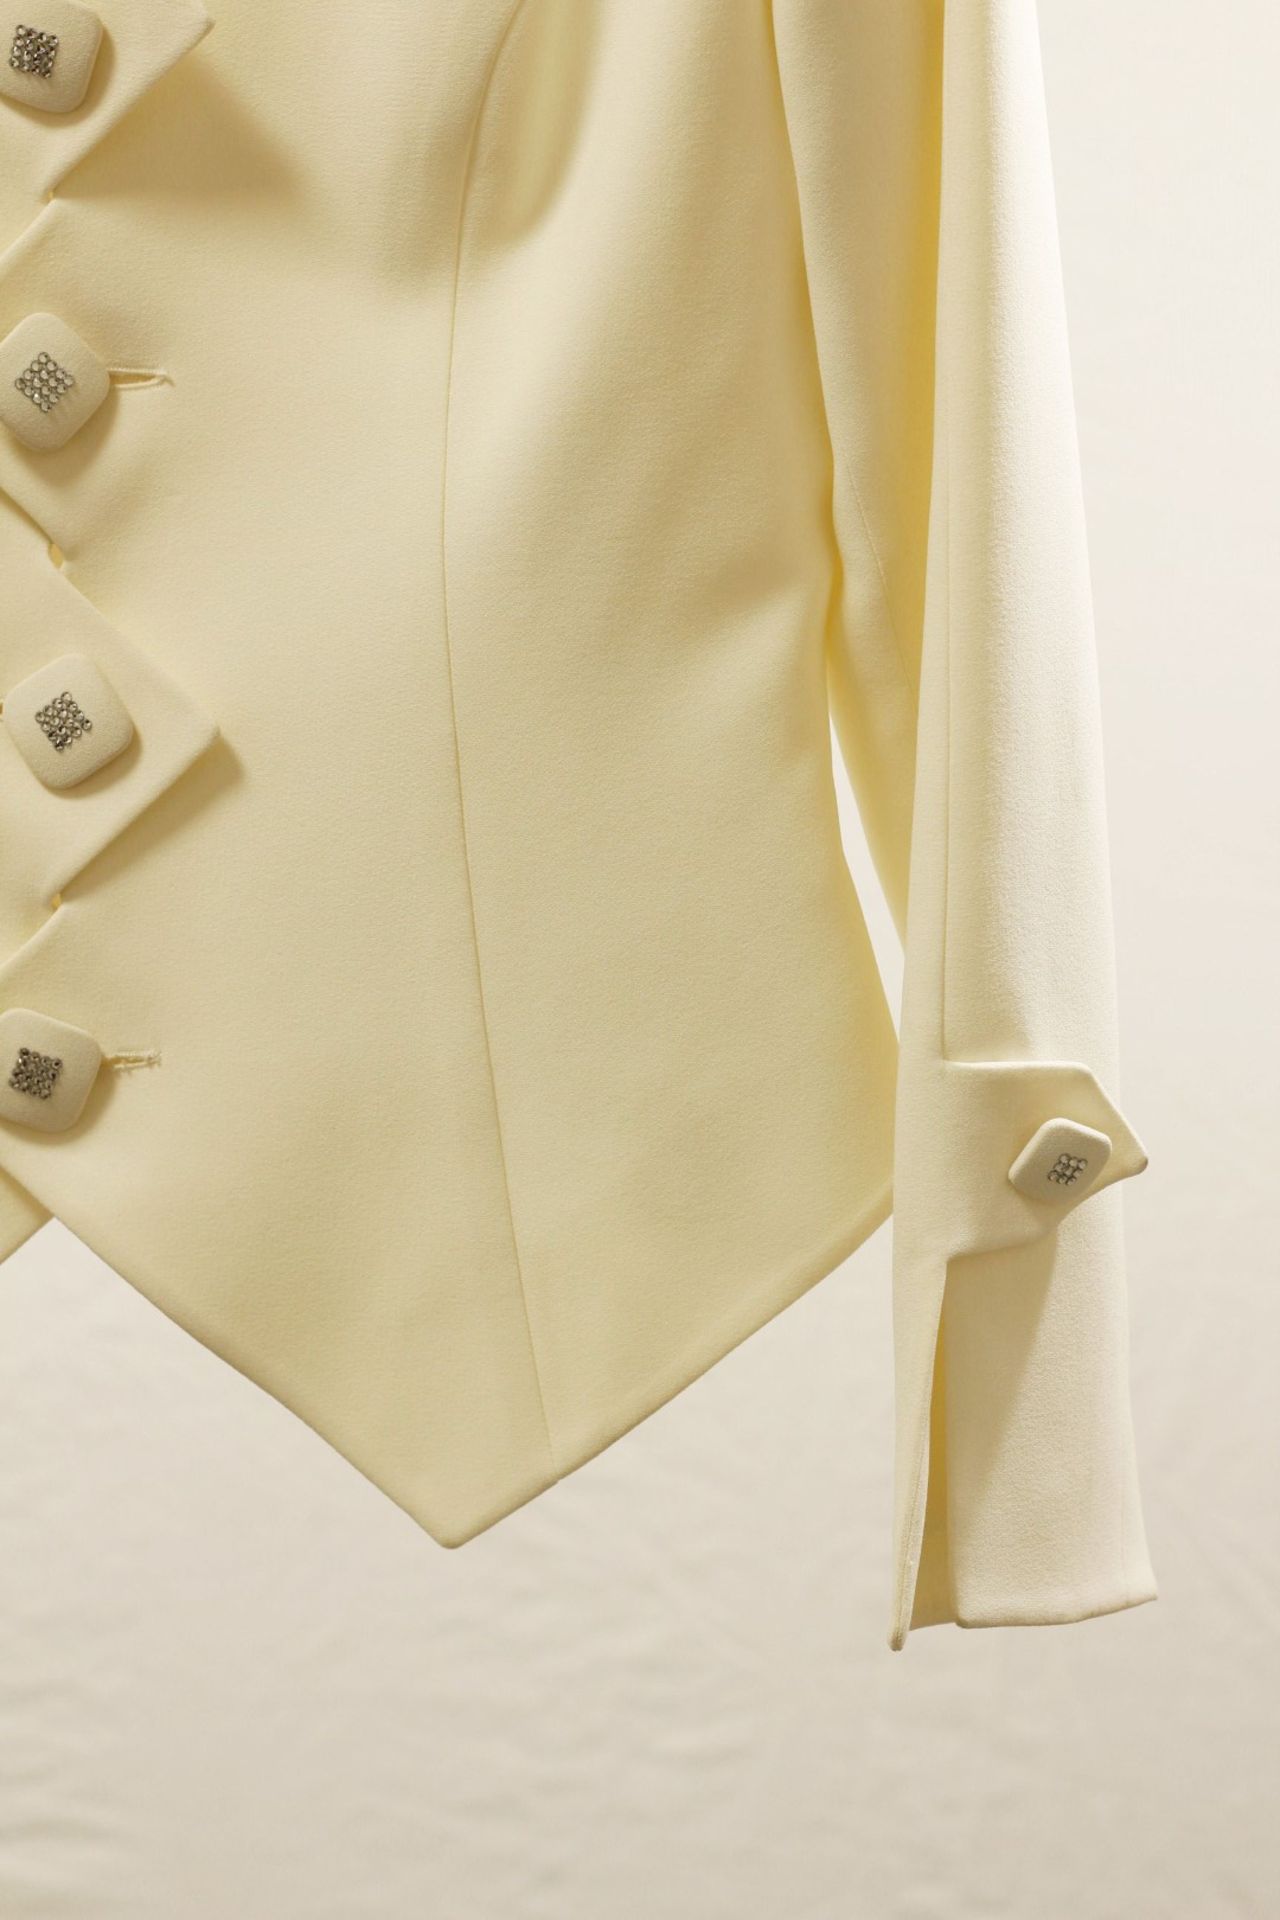 1 x Boutique Le Duc Cream Suit (Jacket And Trousers) - Size: 12 - Material: 82% Acetate, 18% Viscose - Image 3 of 13